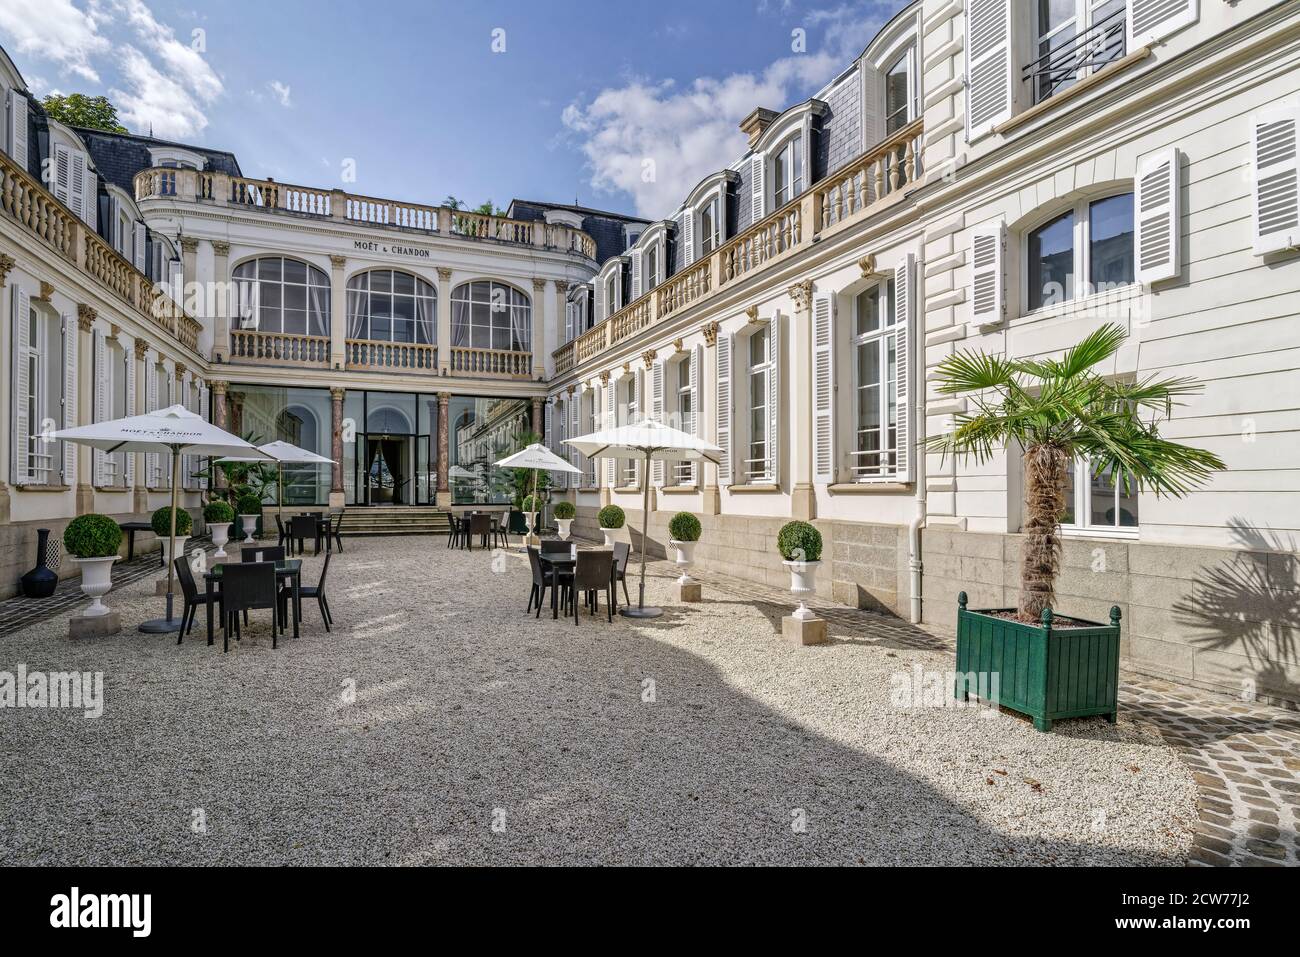 Moet & Chandon Champagner Haus, Avenue de Champagne, Epernay, Champagne, Frankreich Stock Photo